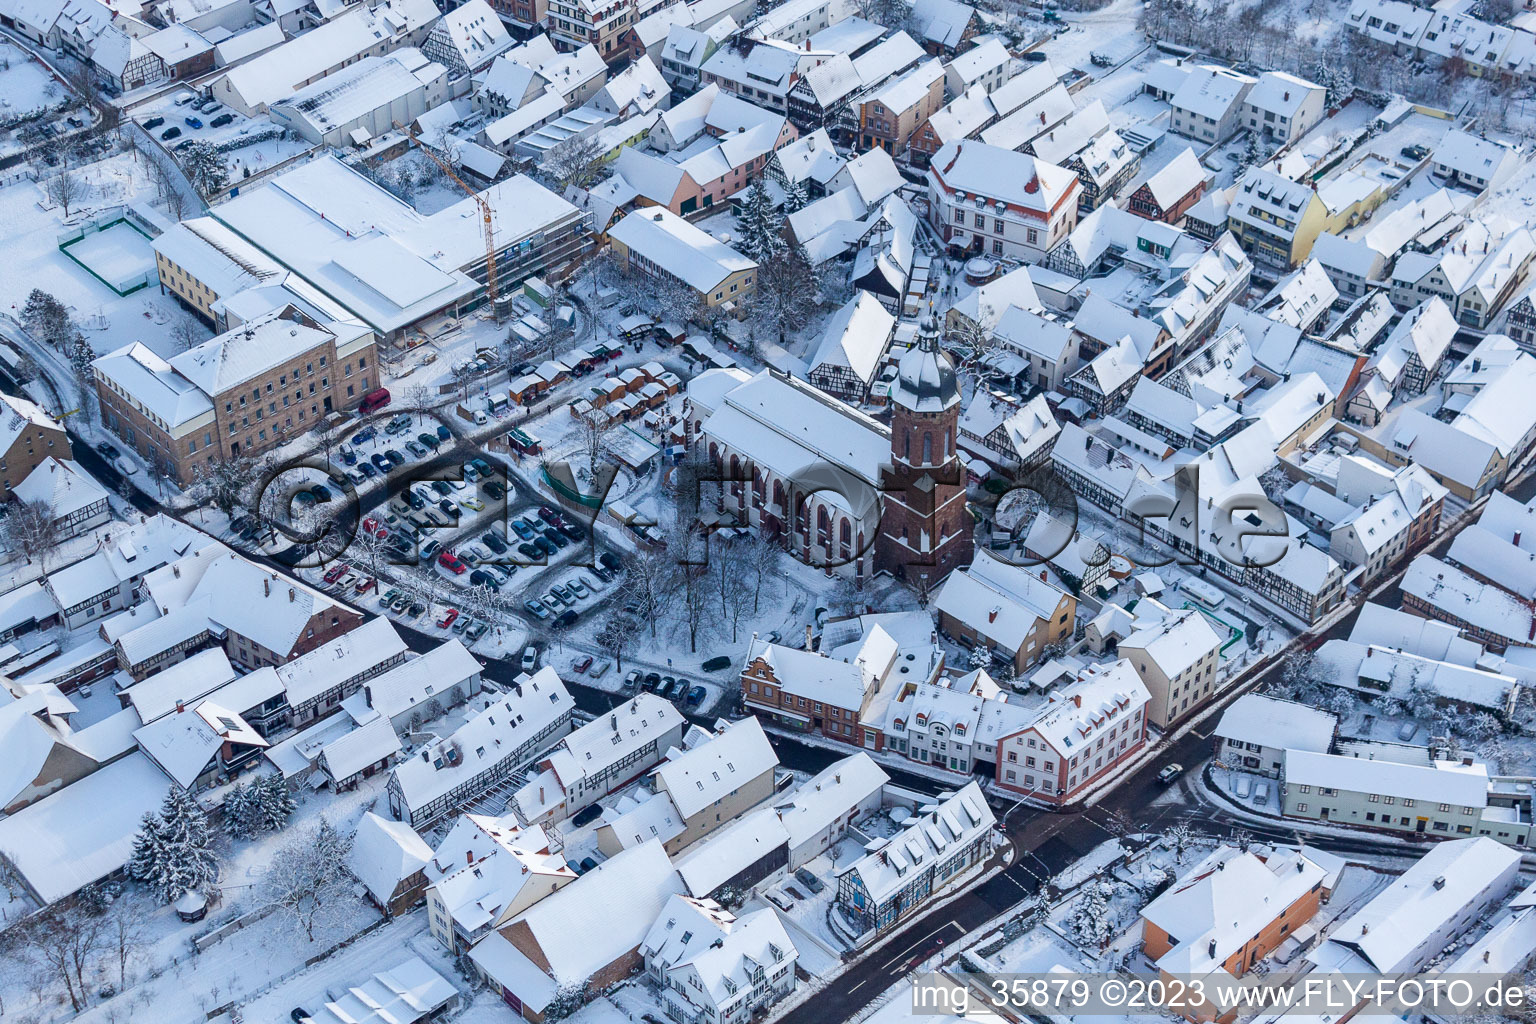 Aerial photograpy of In the snow in Kandel in the state Rhineland-Palatinate, Germany